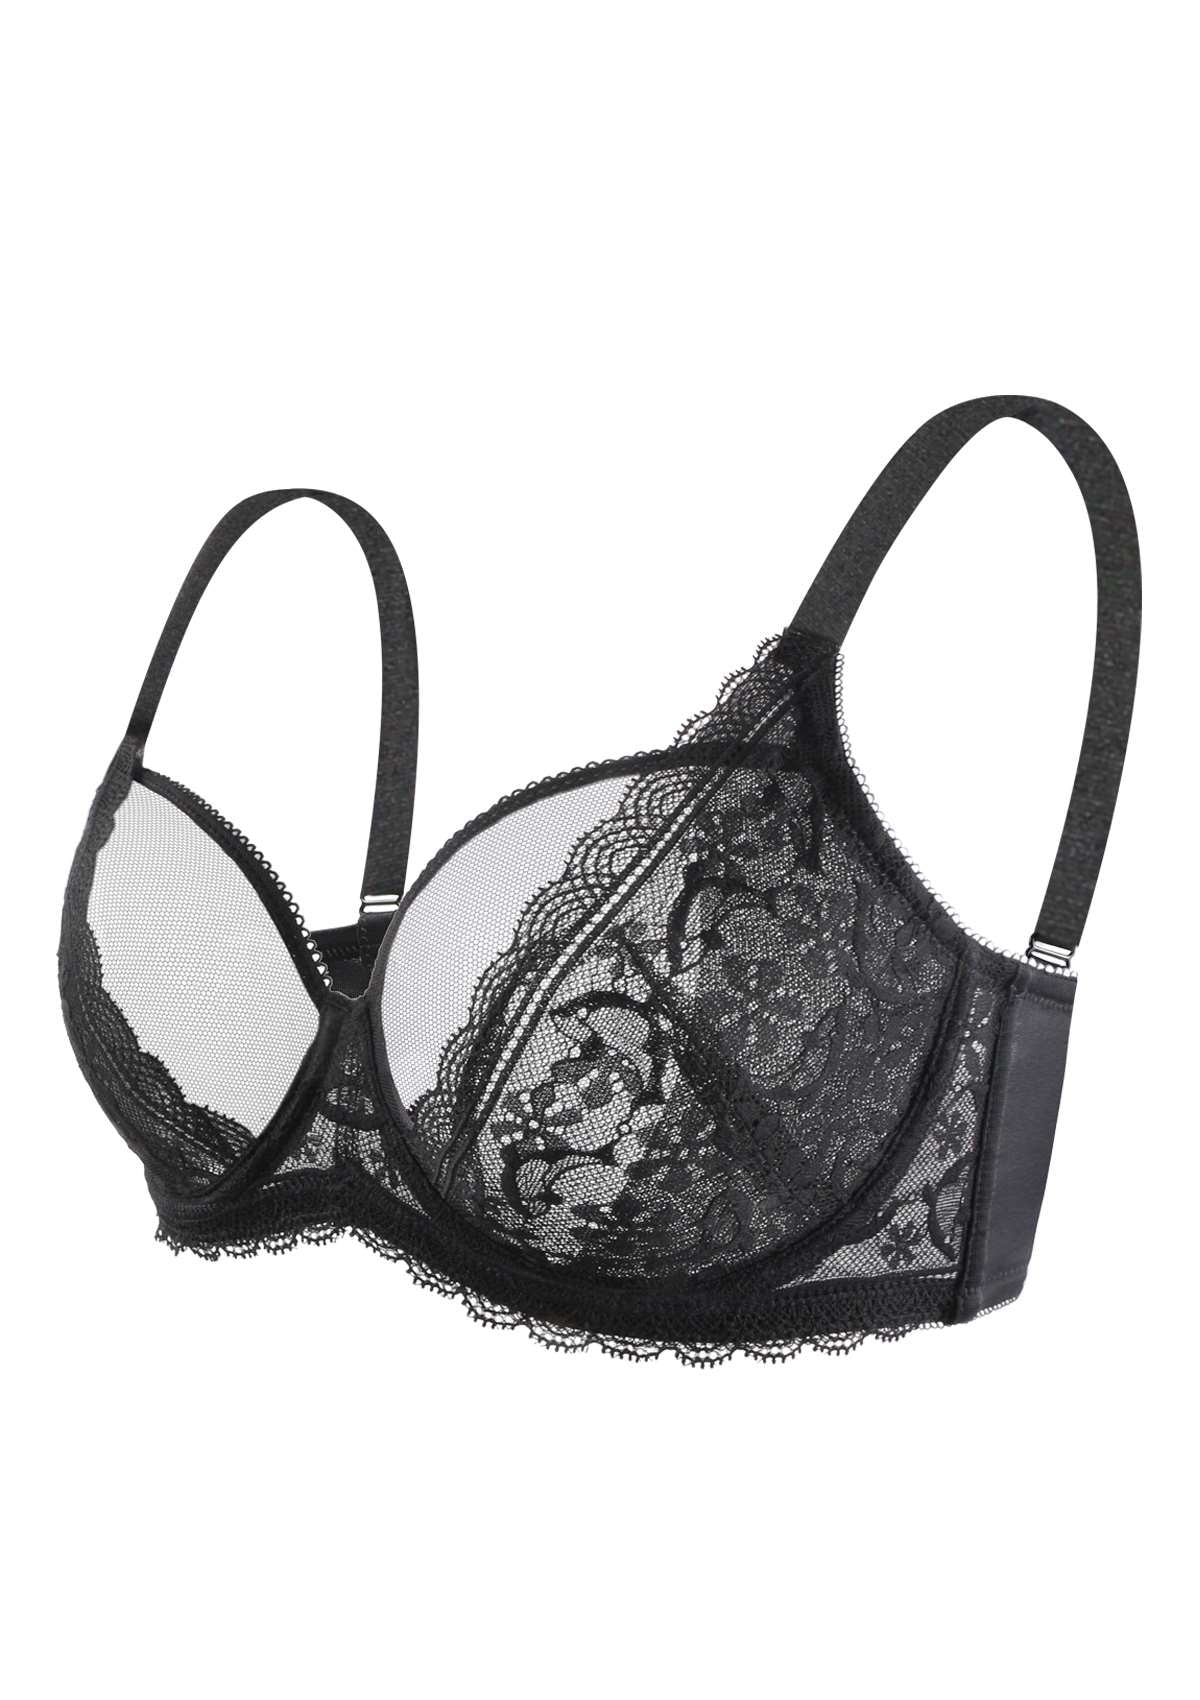 HSIA Anemone Lace Bra And Panties: Back Support Wired Bra - Black / 36 / C